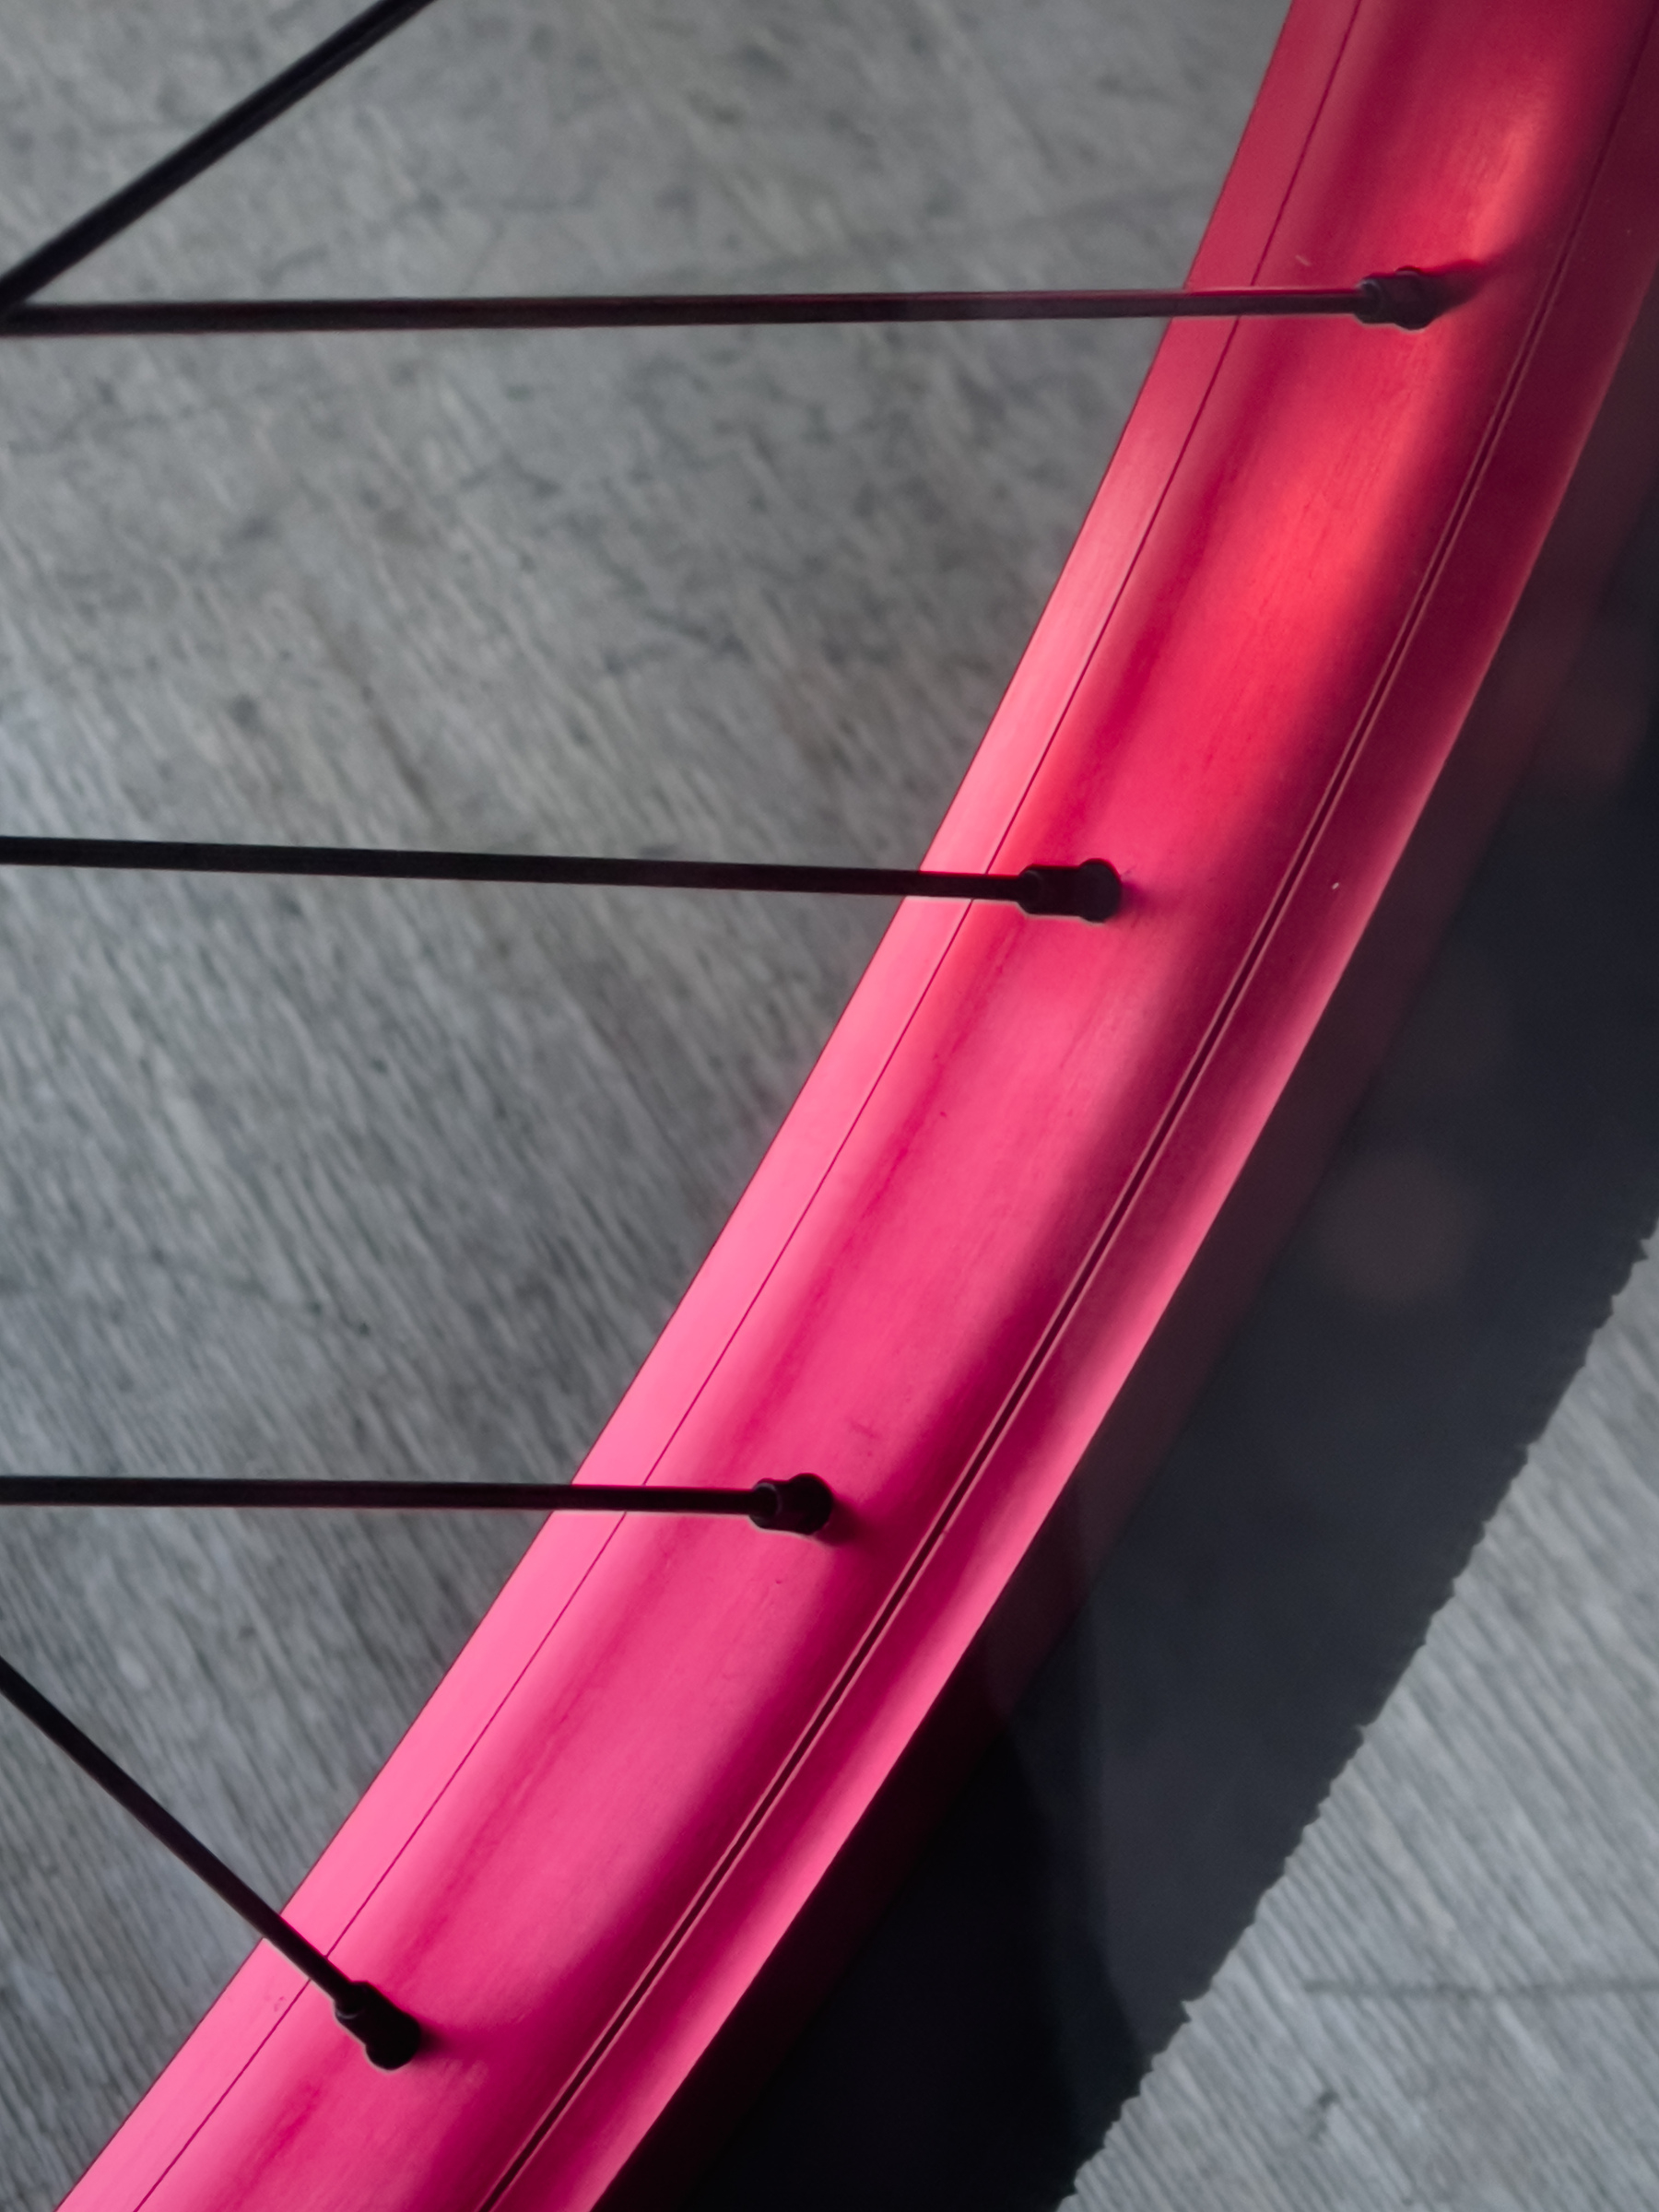 Closeup of bicycle tire rim curving from upper right to lower left. The rim is a beautiful hue of pink-red-orange.